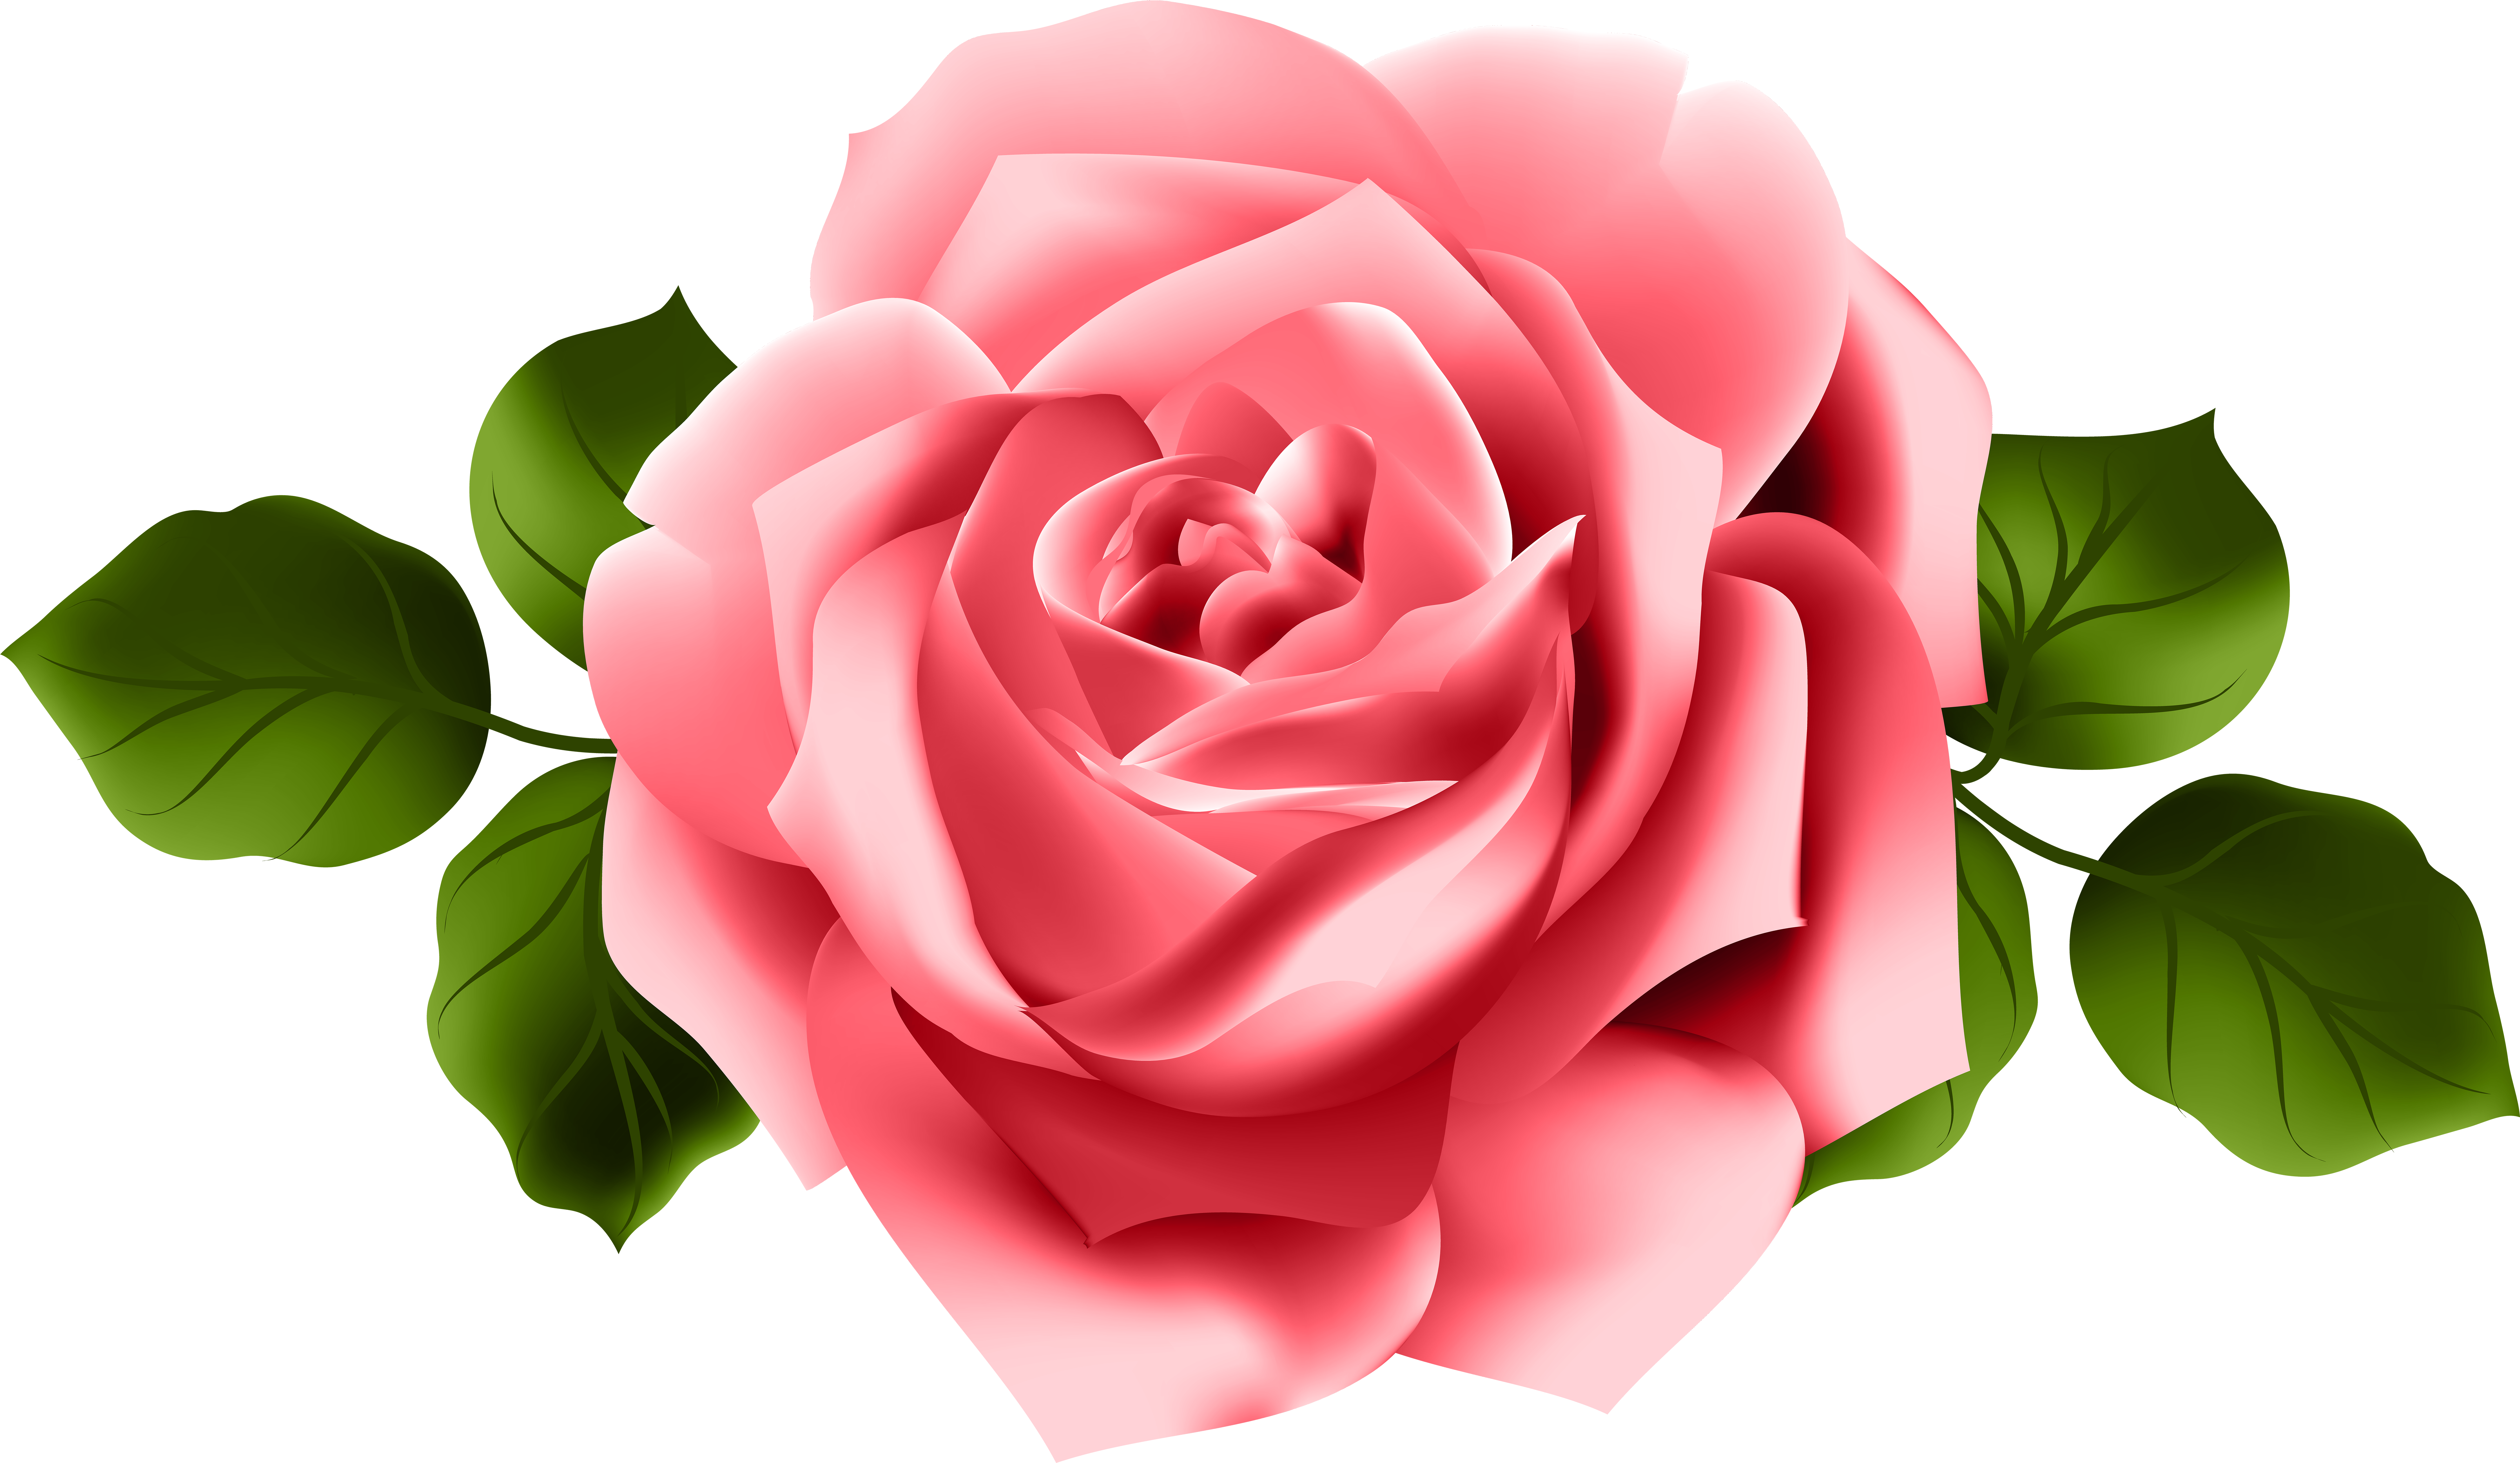 A Pink Rose With Green Leaves